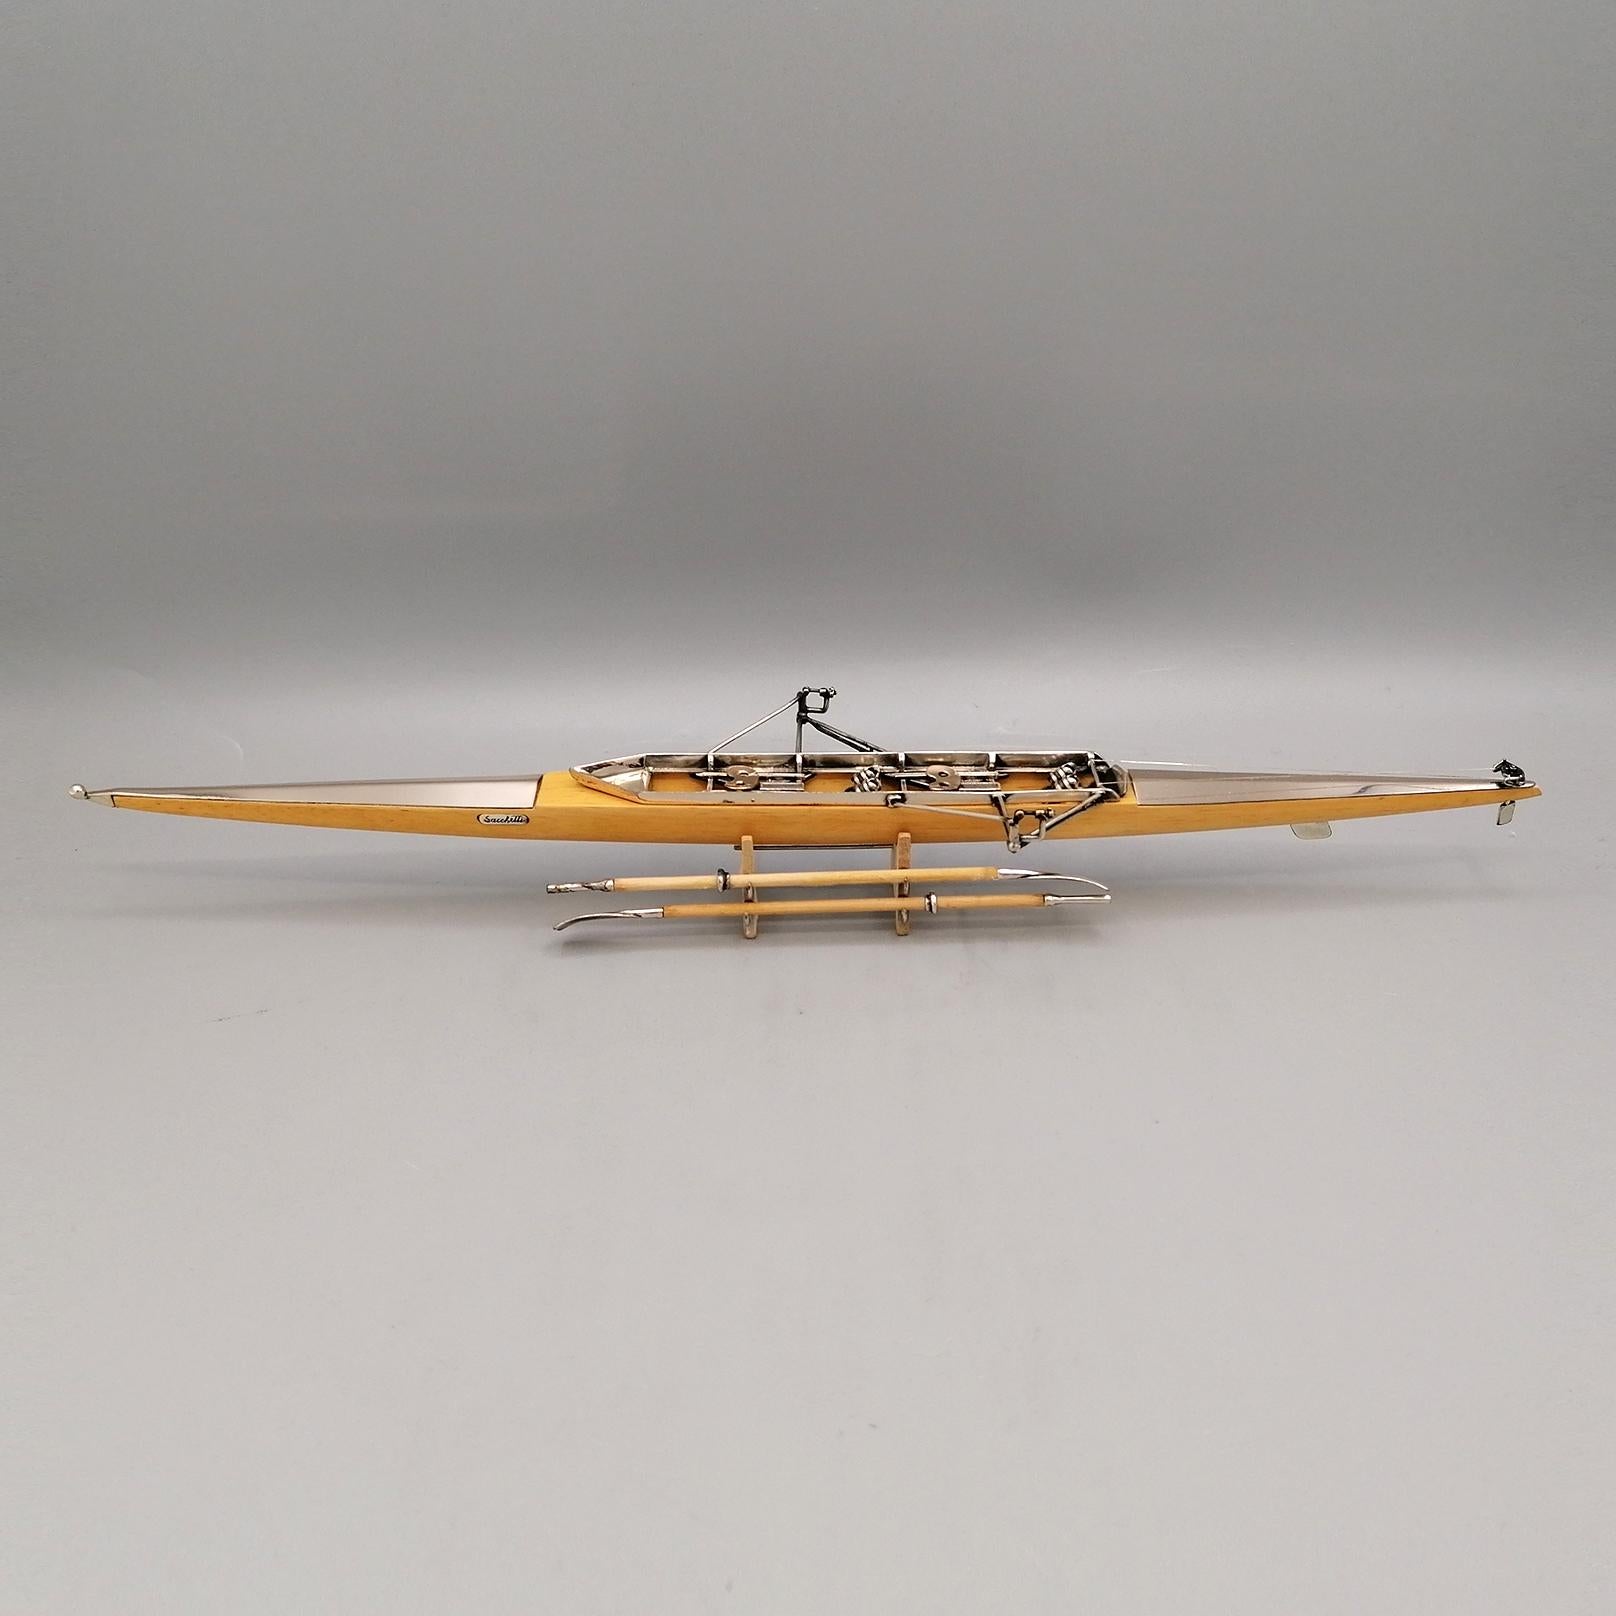 Sterling silver and wood racing canoe.
Miniature copy of rowing boat a coxless pair, abbreviated as a 2- and also known as a straight pair, is a racing shell used in the sport of competitive rowing. It is designed for two rowers, who propel the boat